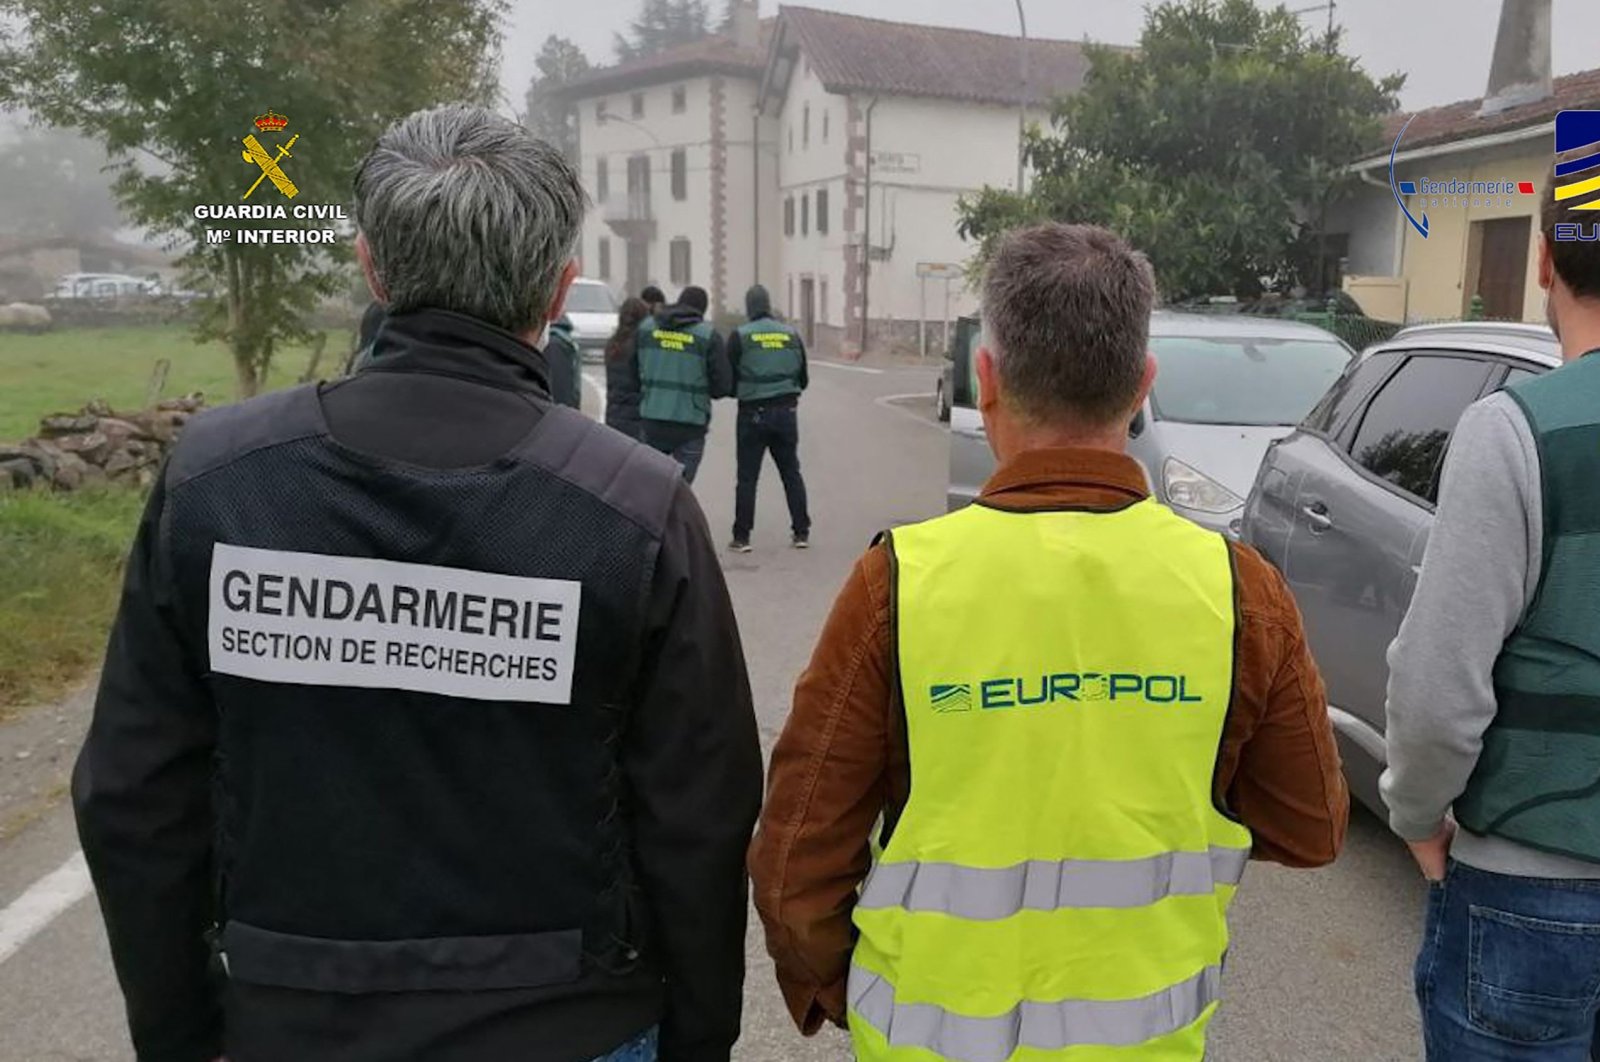 This handout picture released by the Spanish Guardia Civil on October 25, 2021 shows (L to R) members of French Gendarmerie, Europol and Guardia Civil taking part in a joint operation against smugglers transferring irregular migrants to France, in Urrasun and Irurita in Navarre region, northern Spain. (AFP Photo)